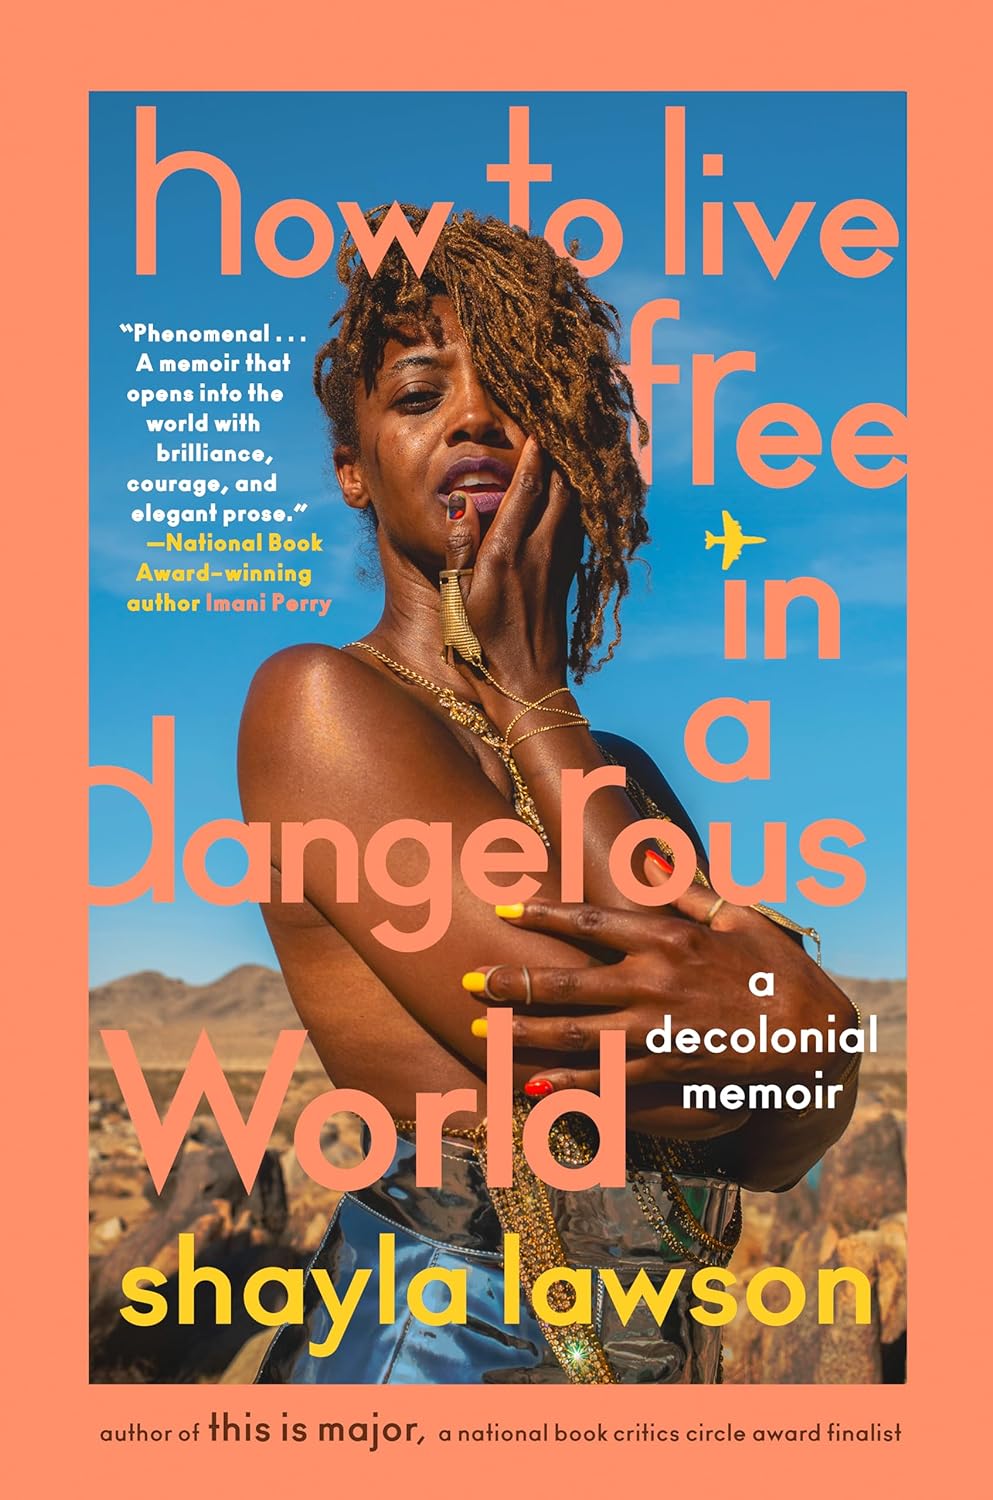 a graphic of the cover of How To Live Free in a Dangerous World: A Decolonial Memoir by Shayla Lawson